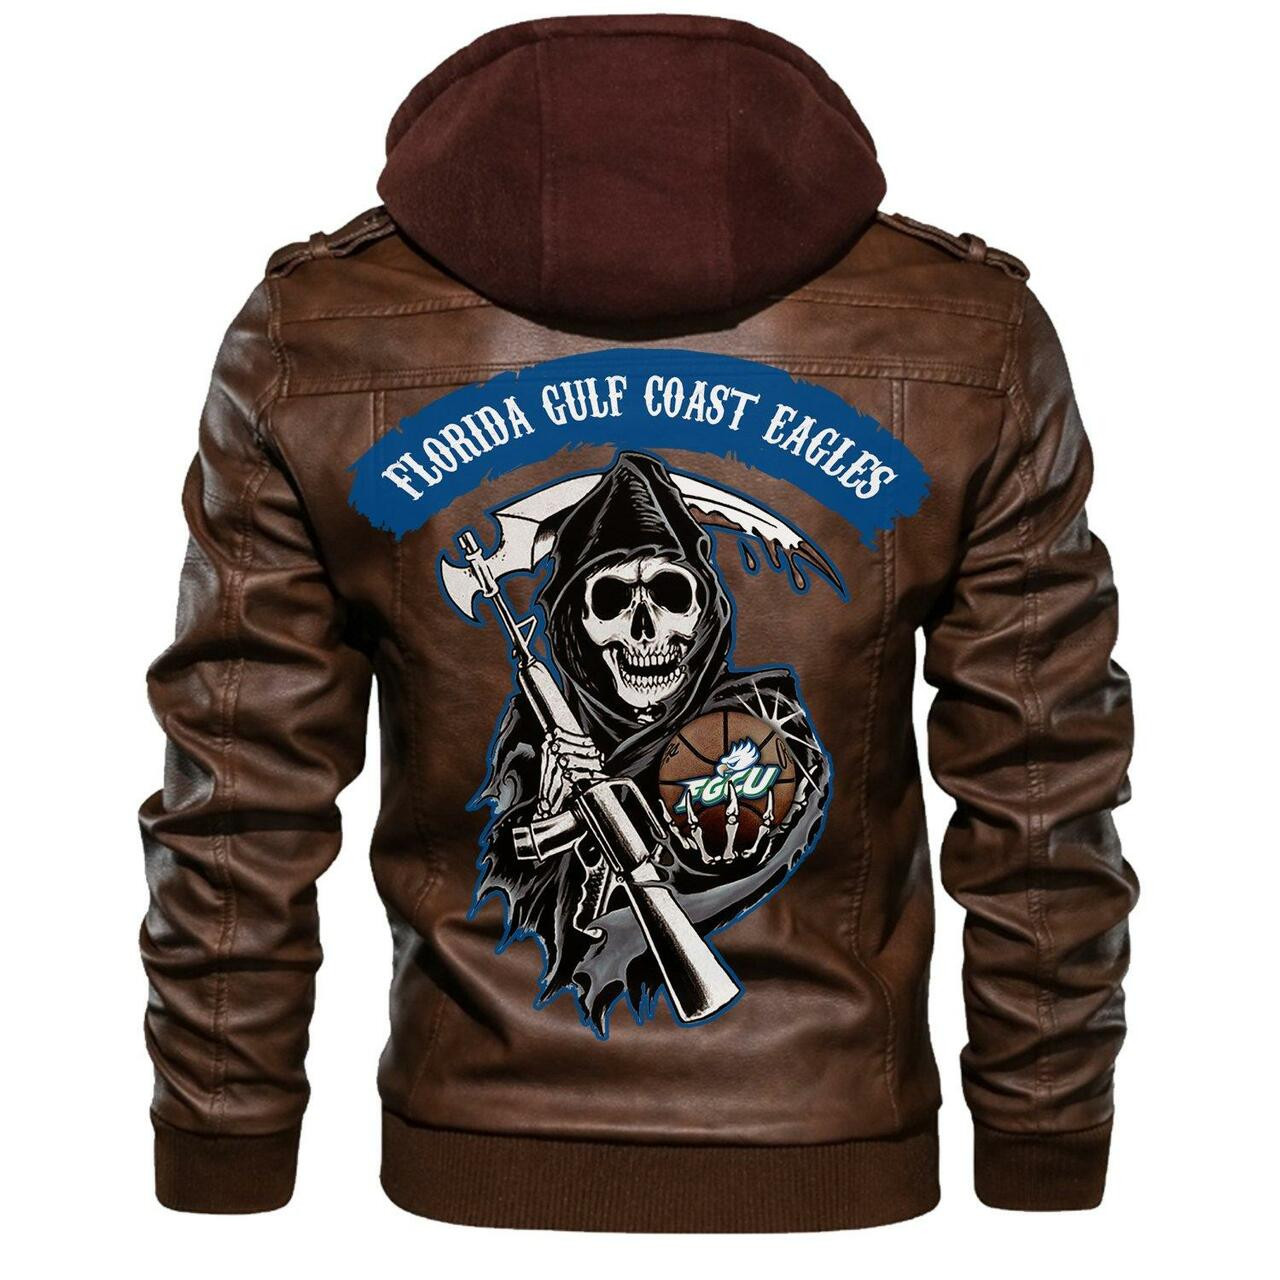 Check out and find the right leather jacket below 147